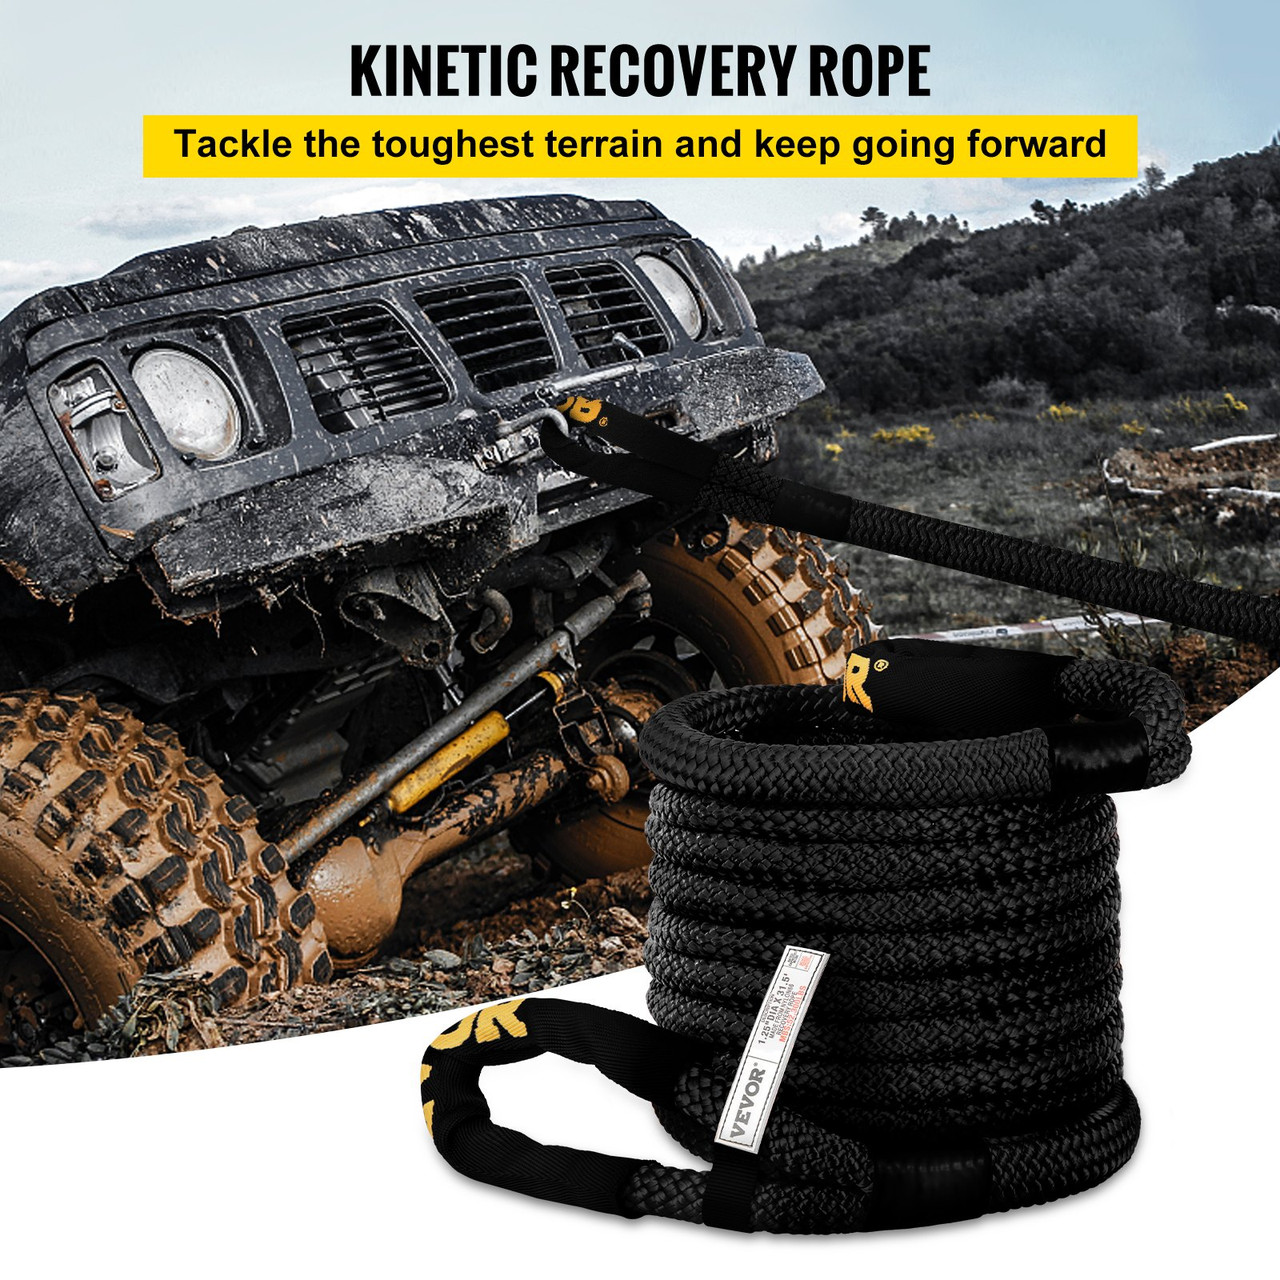 Kinetic Energy Recovery Rope Tow Rope 1.25" x 31.5' 52300 LBS w/ Carry Bag